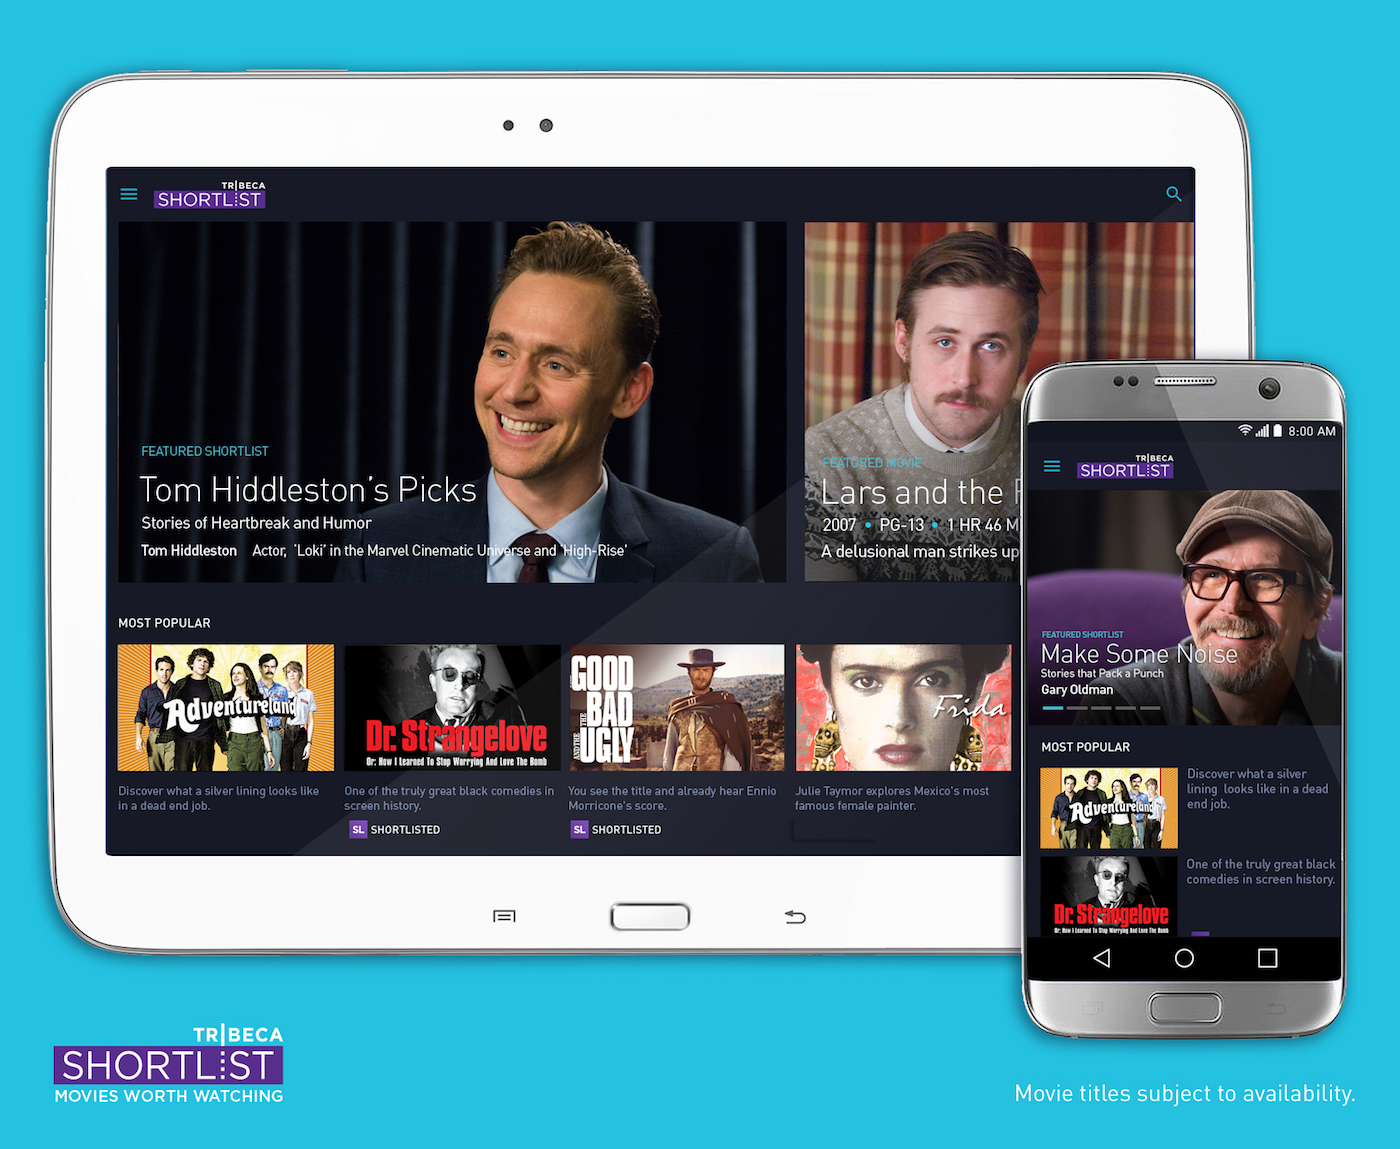 Tribeca Shortlist now streams movies on Android devices